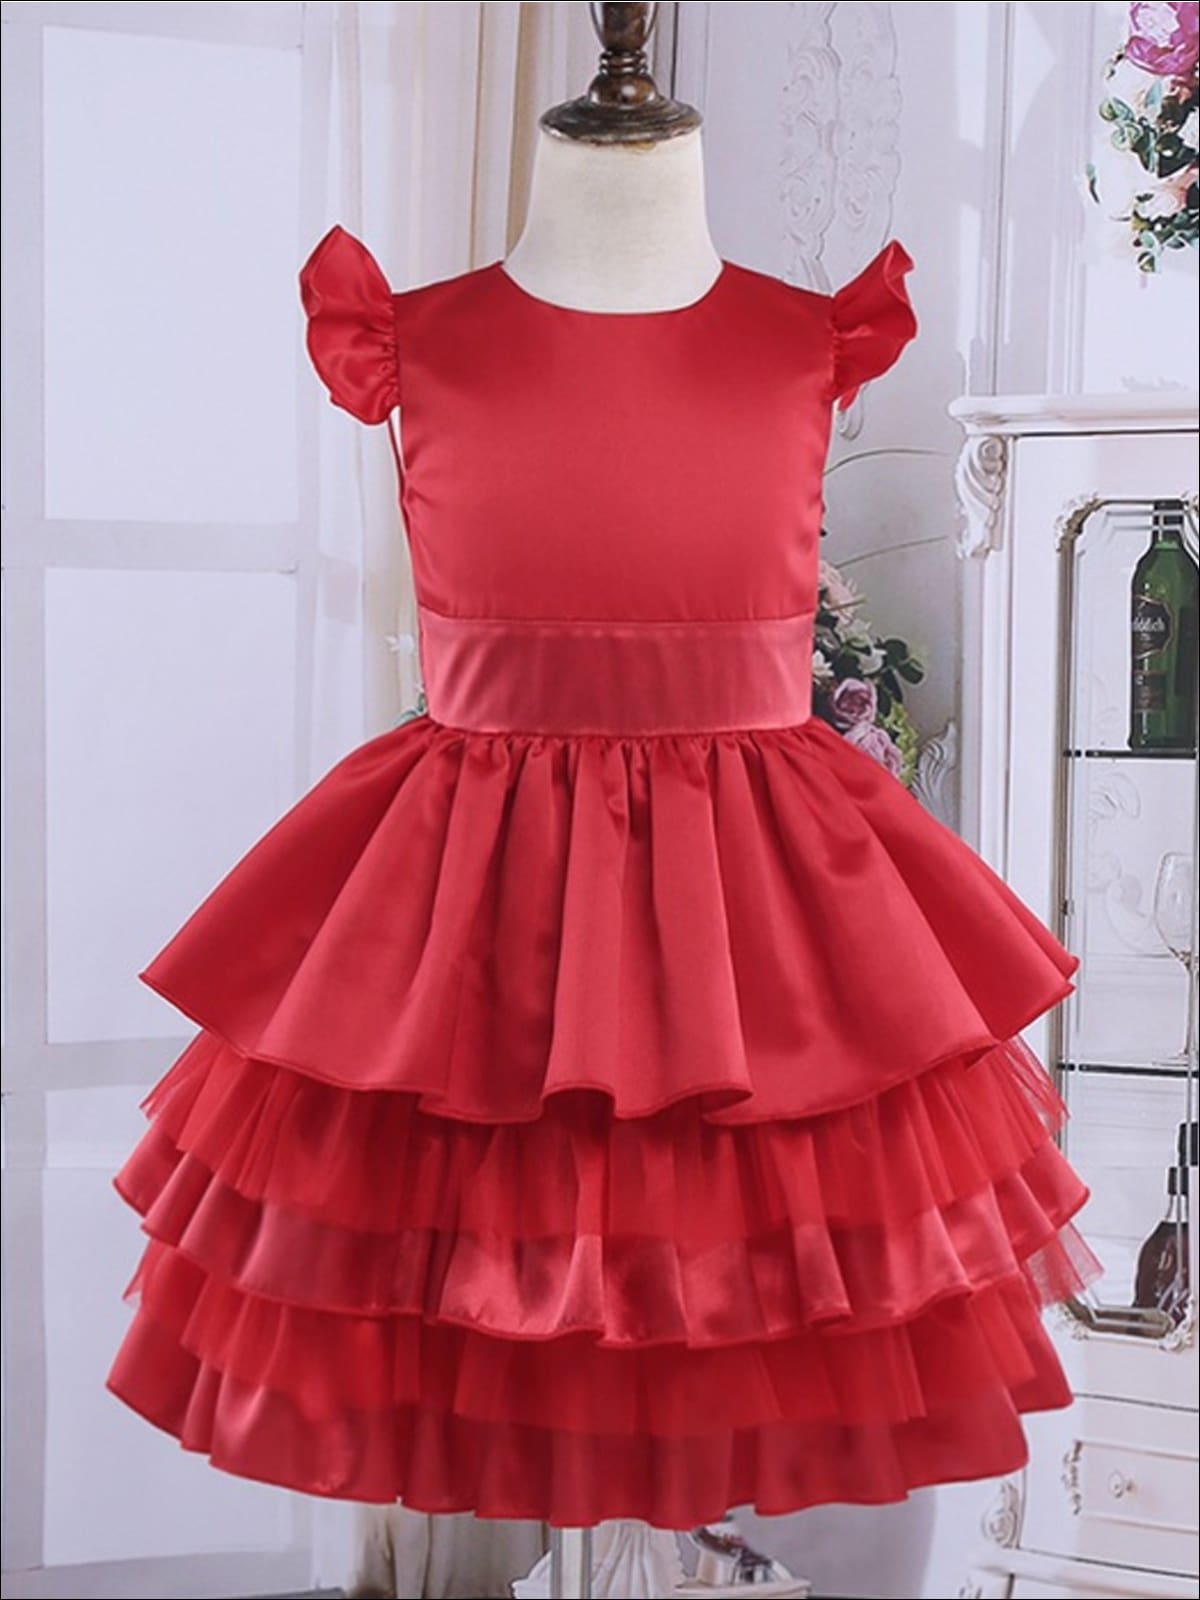 Girls Red Flutter Sleeve Satin Tiered Ruffle Special Occasion Party Dress - Red / 4T - Girls Fall Dressy Dress